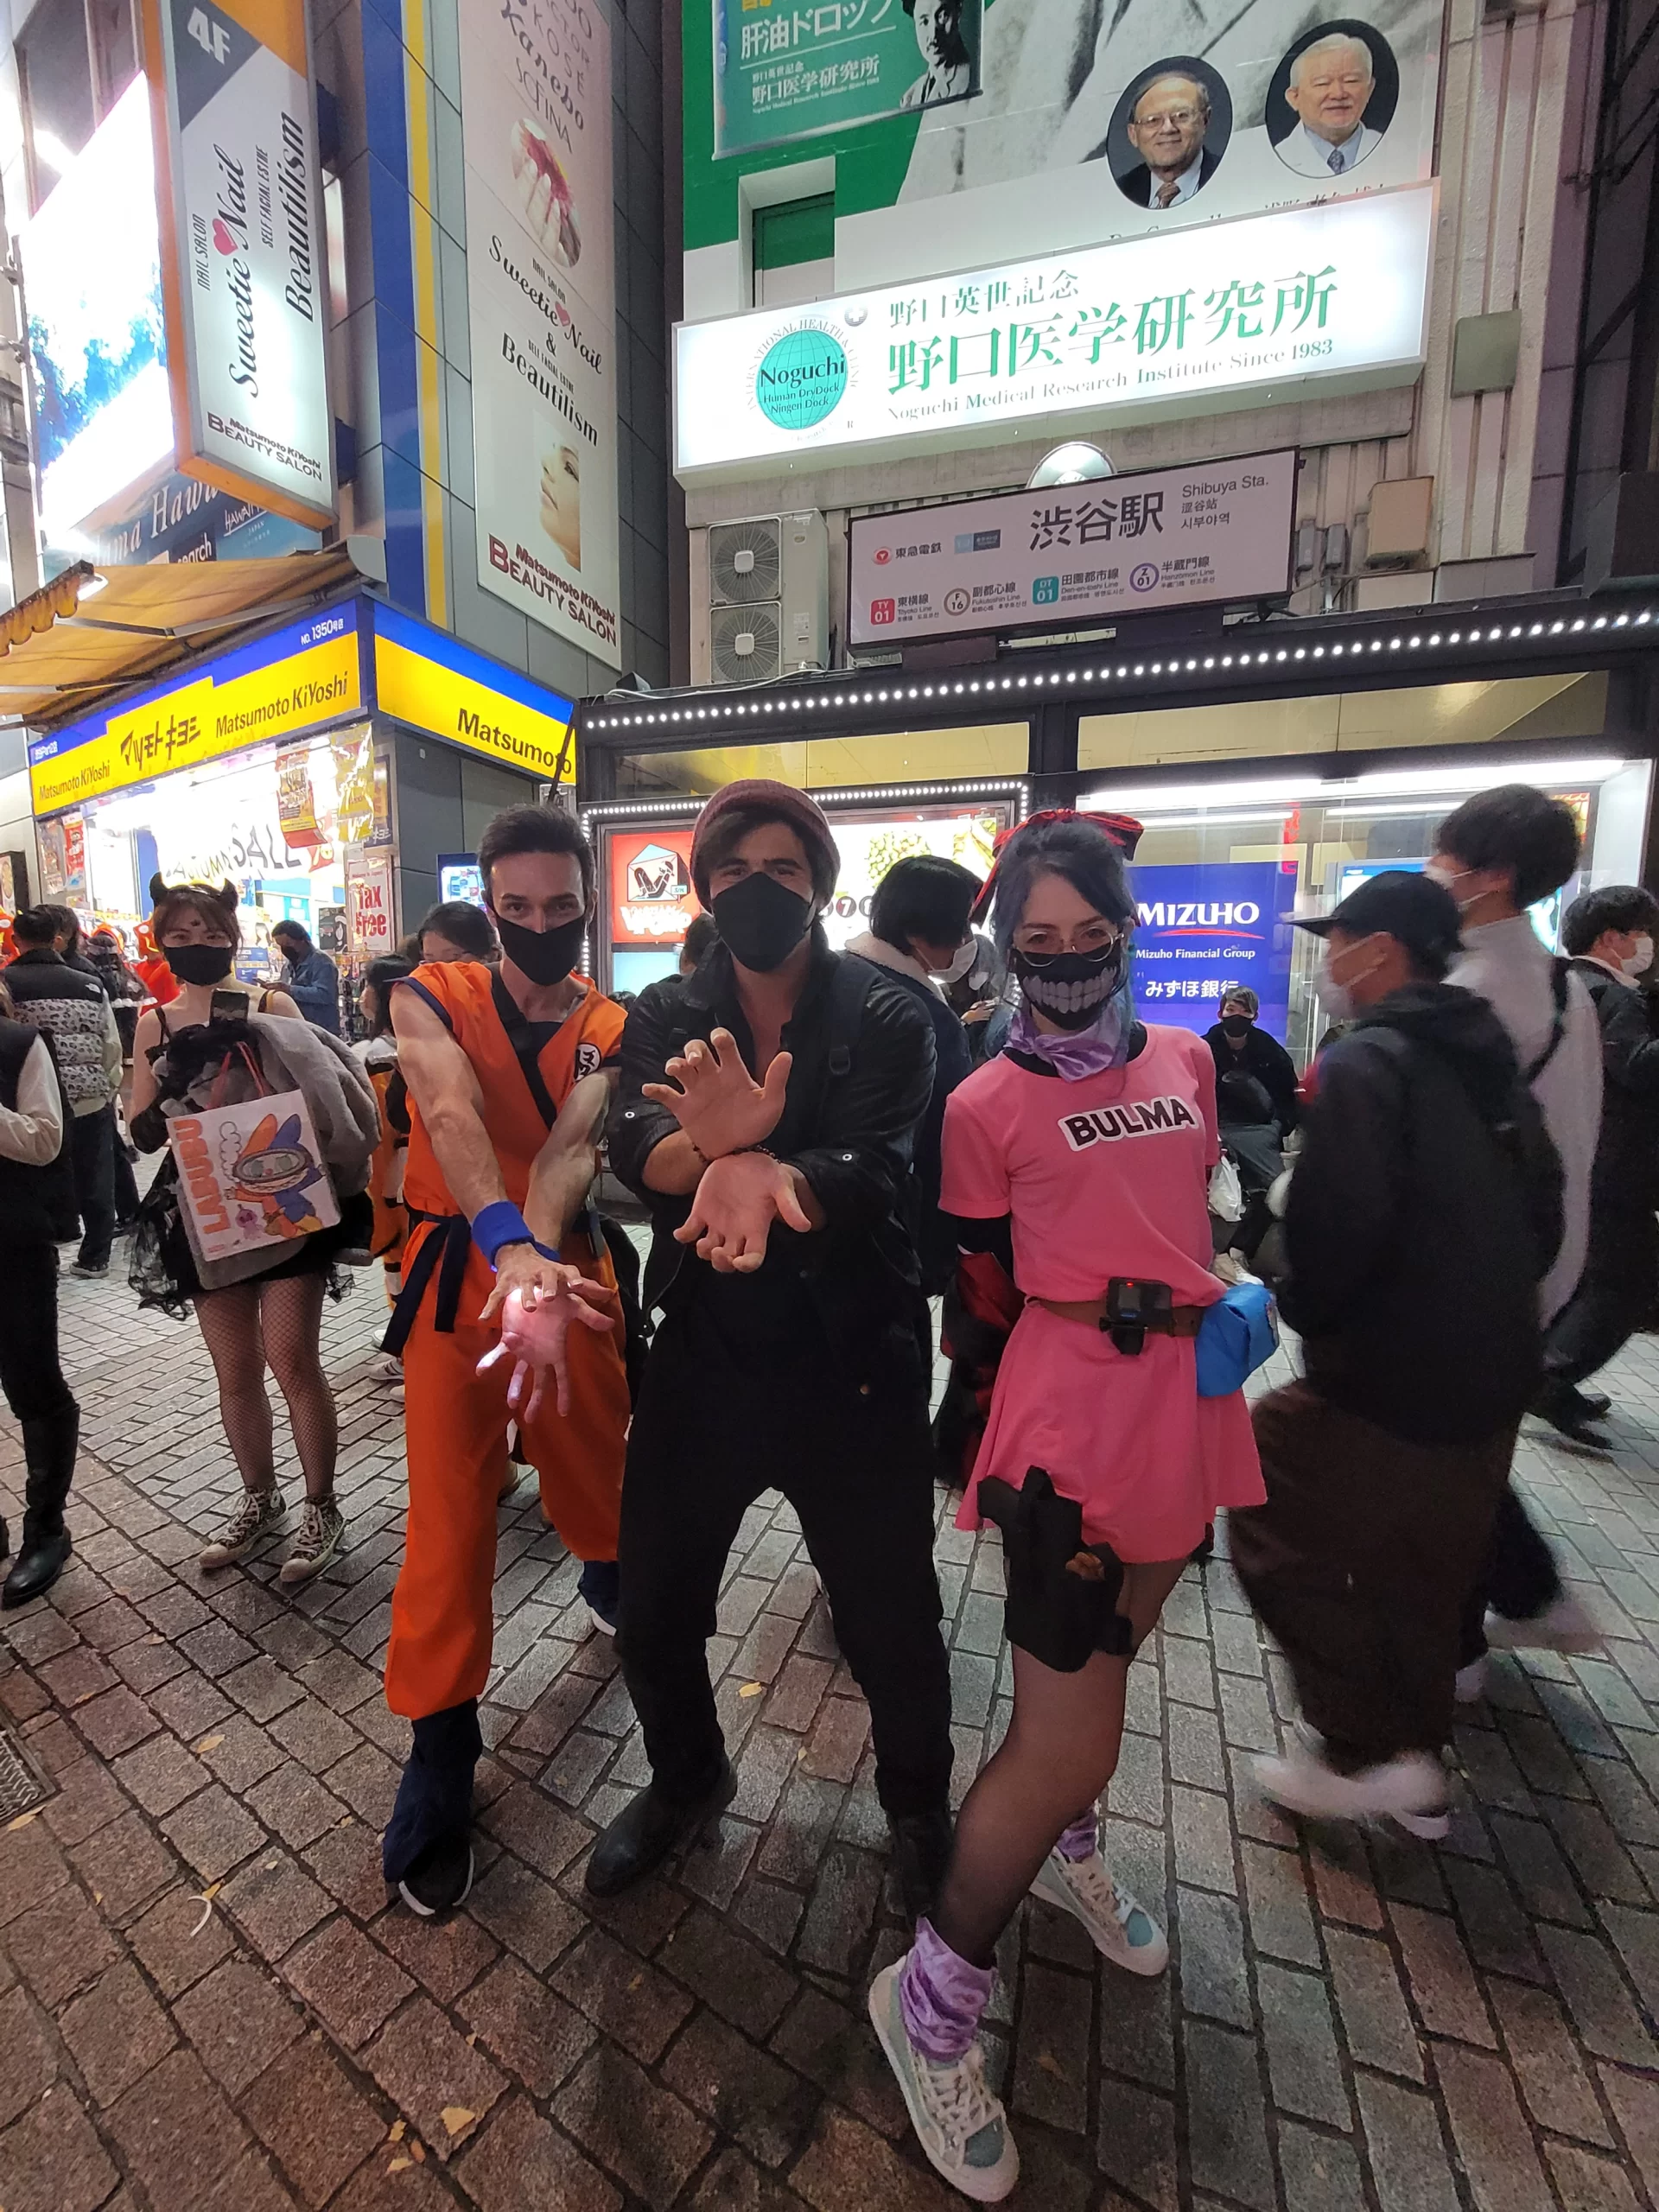 Halloween in Japan is one of the wildest nights of the year